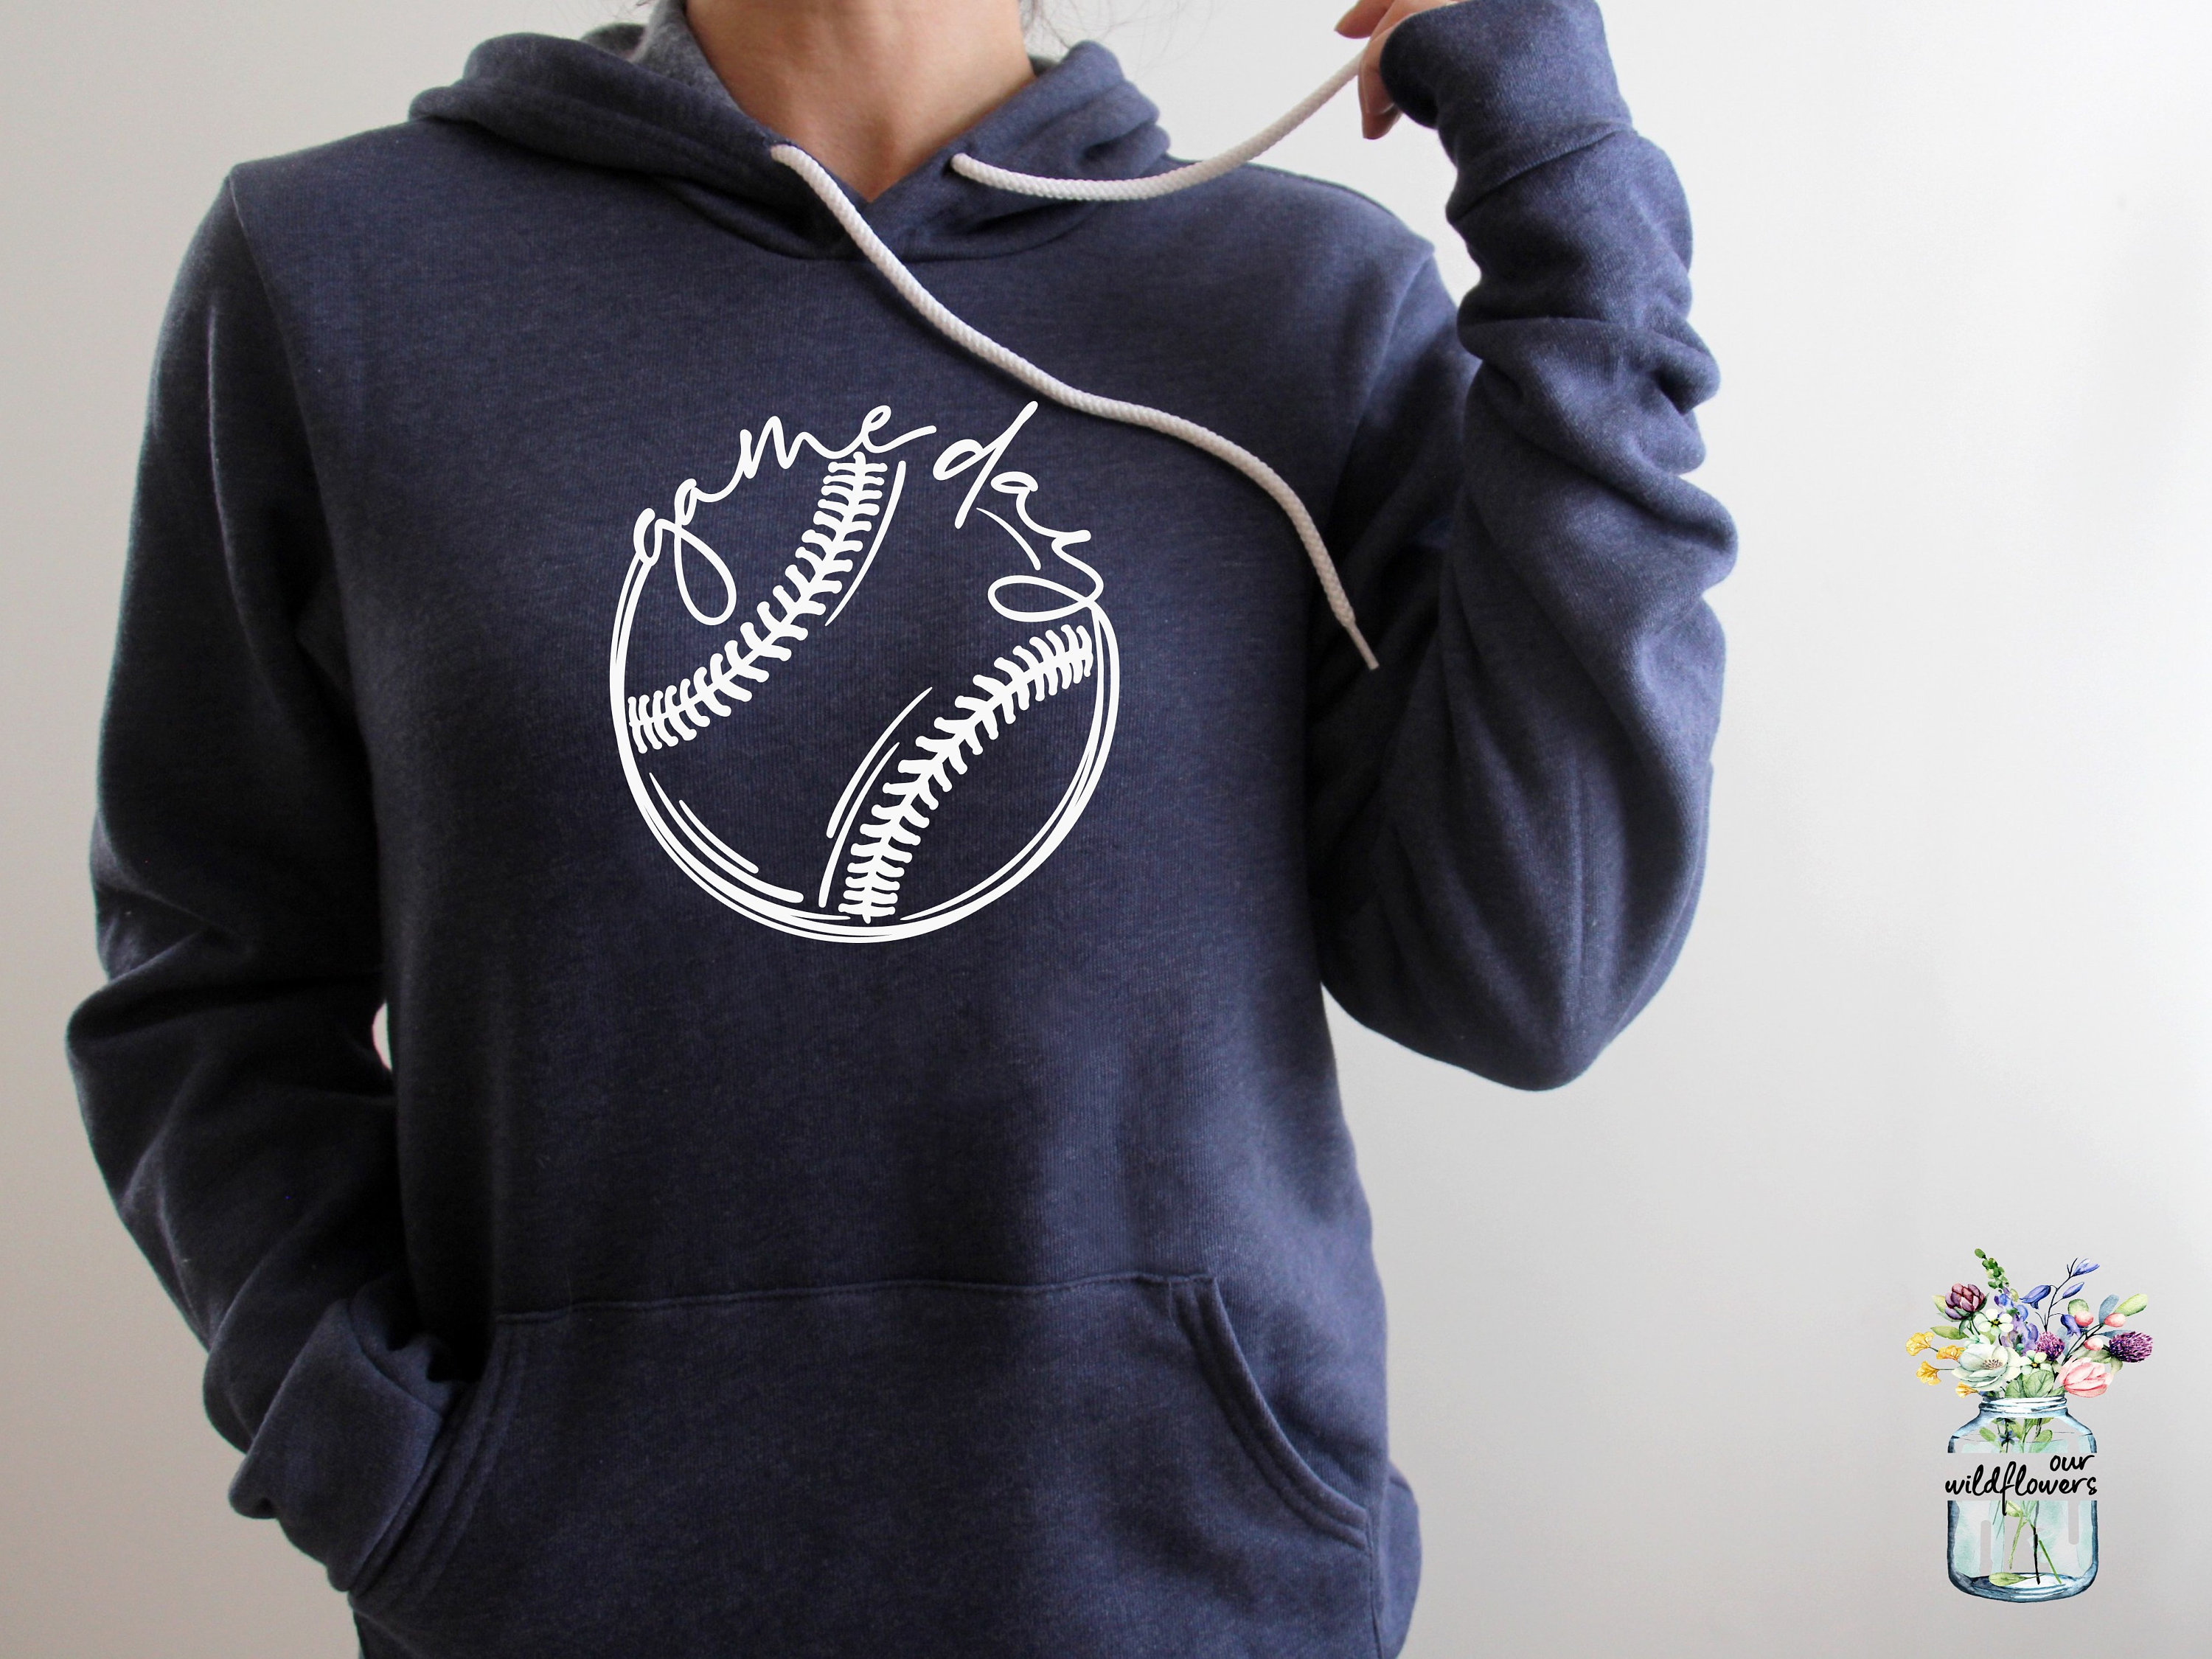 Comfy Hoodie Shirt Softball Moms and Fans